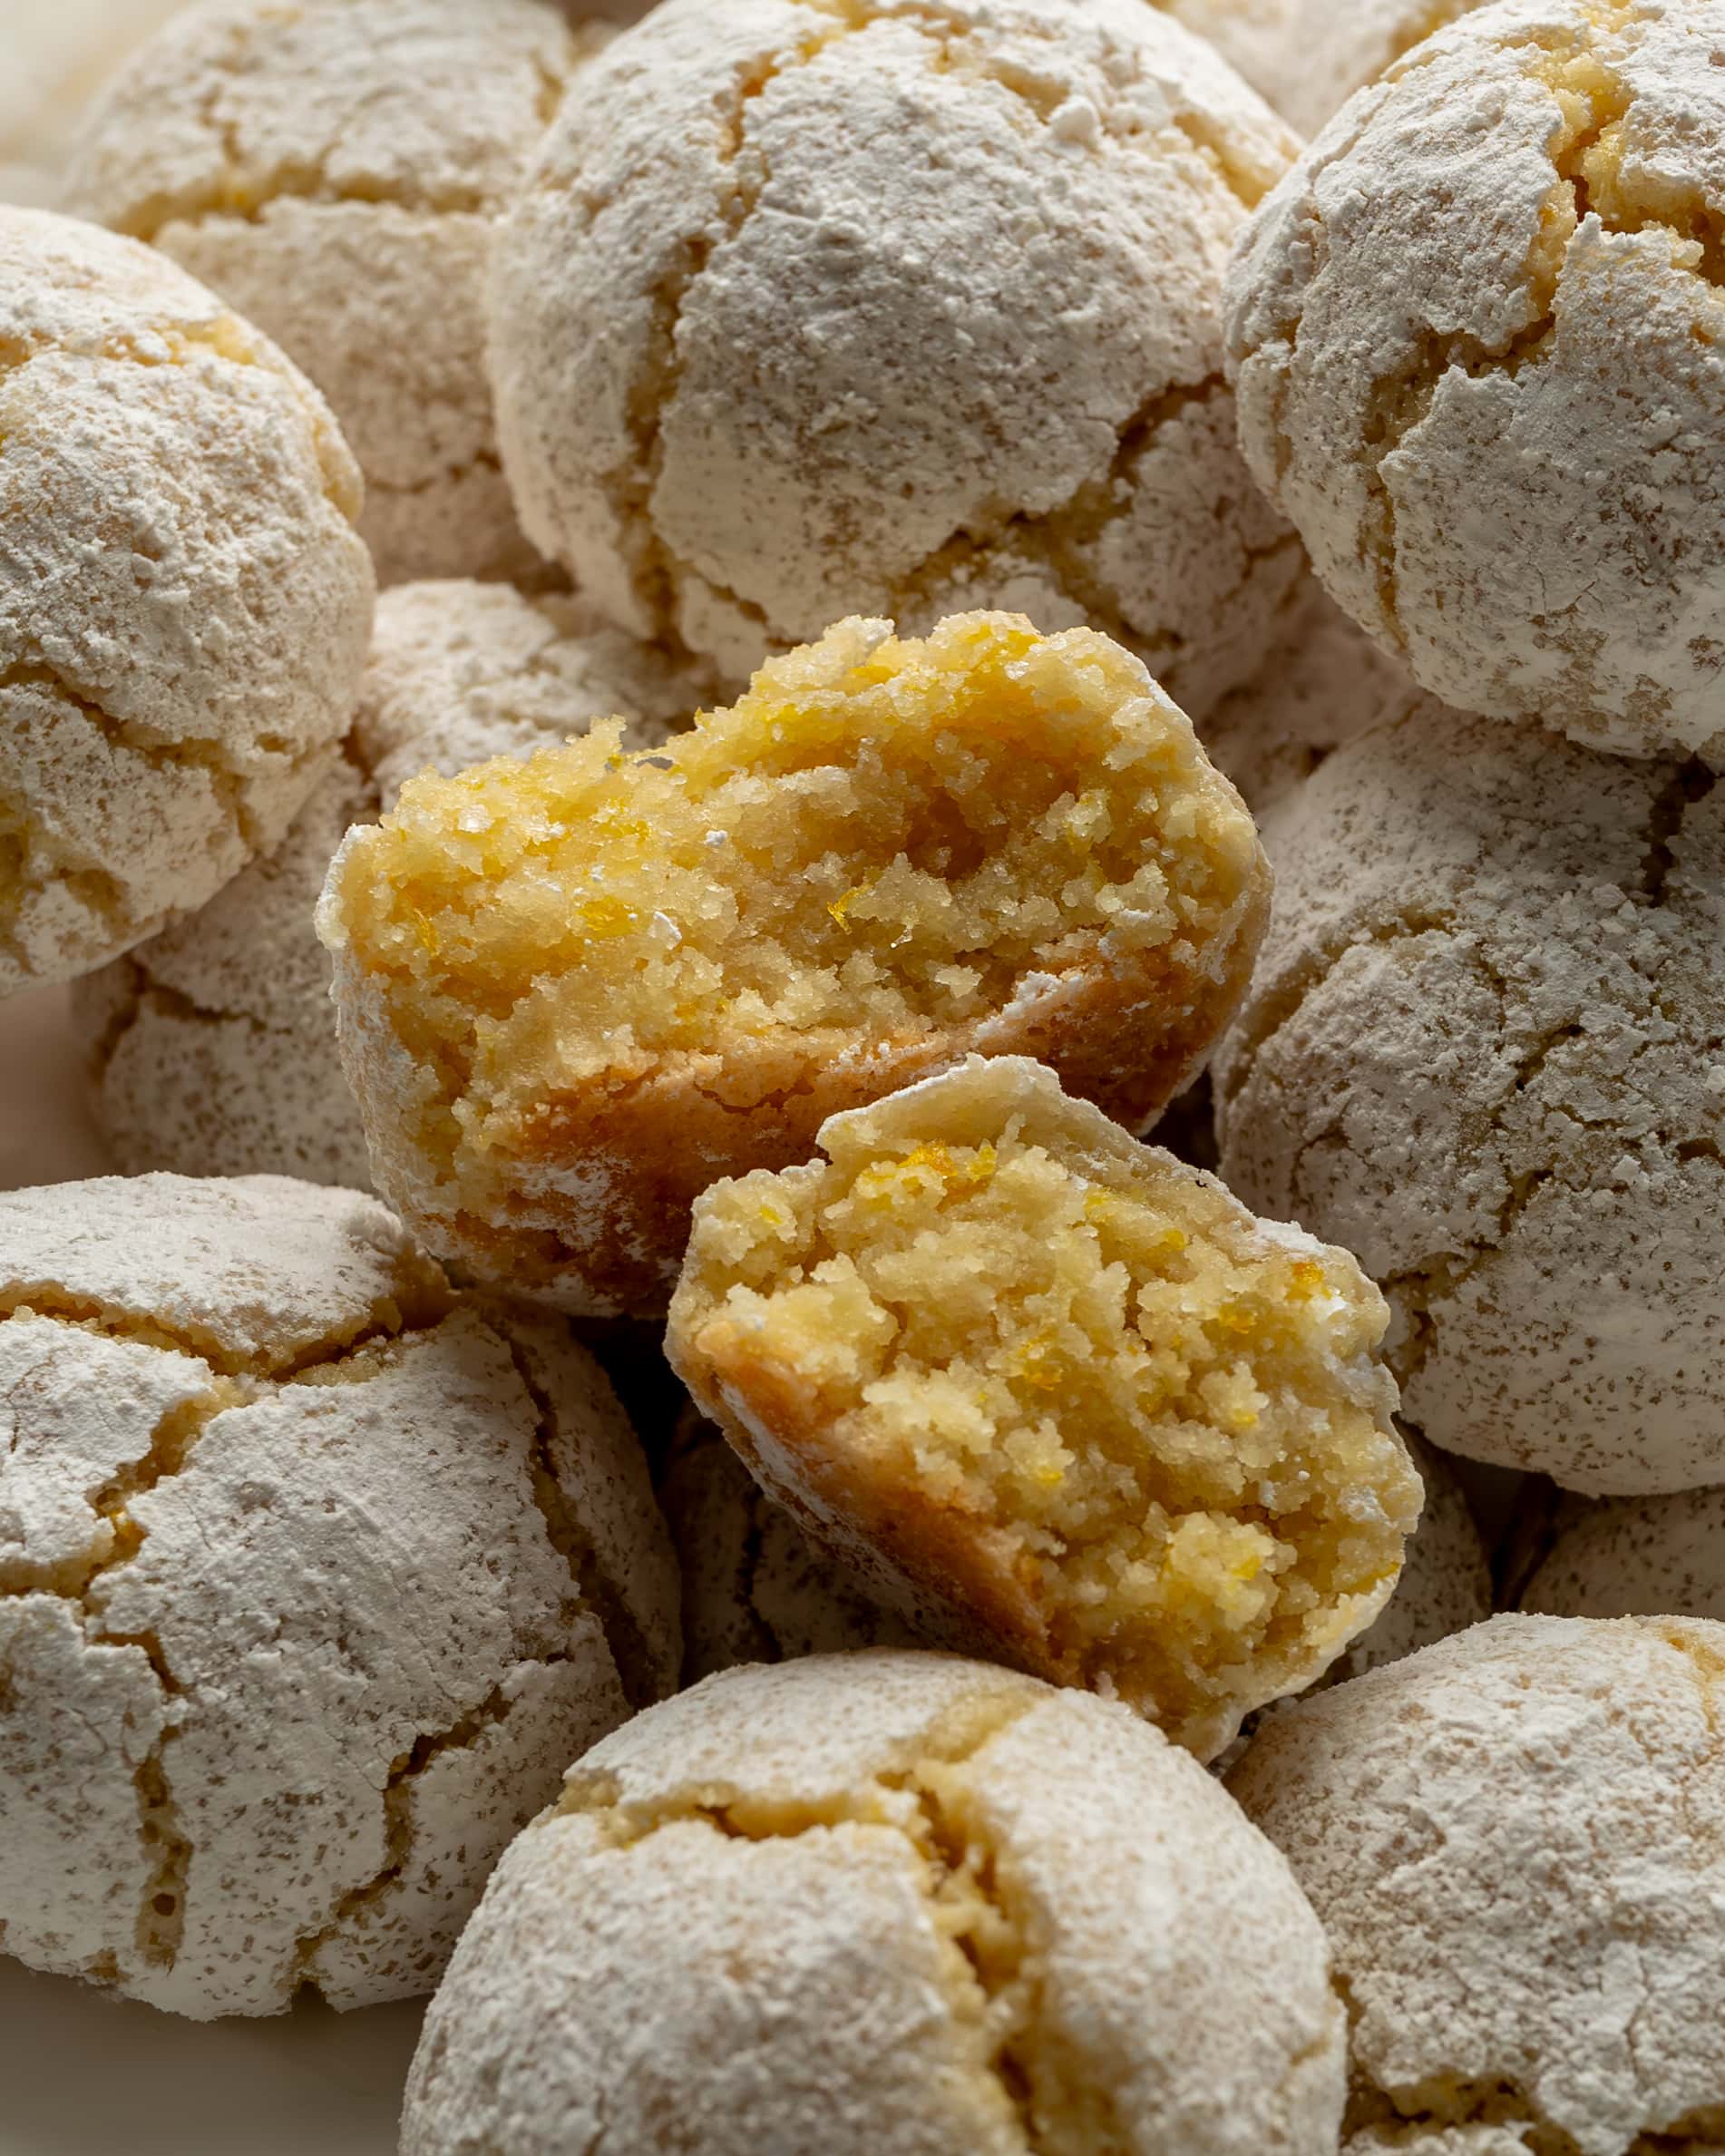 Limoncello cookies cut in half with a zesty lemon colored filled exposed. The tops of the cookies are coated in  white powdered sugar.